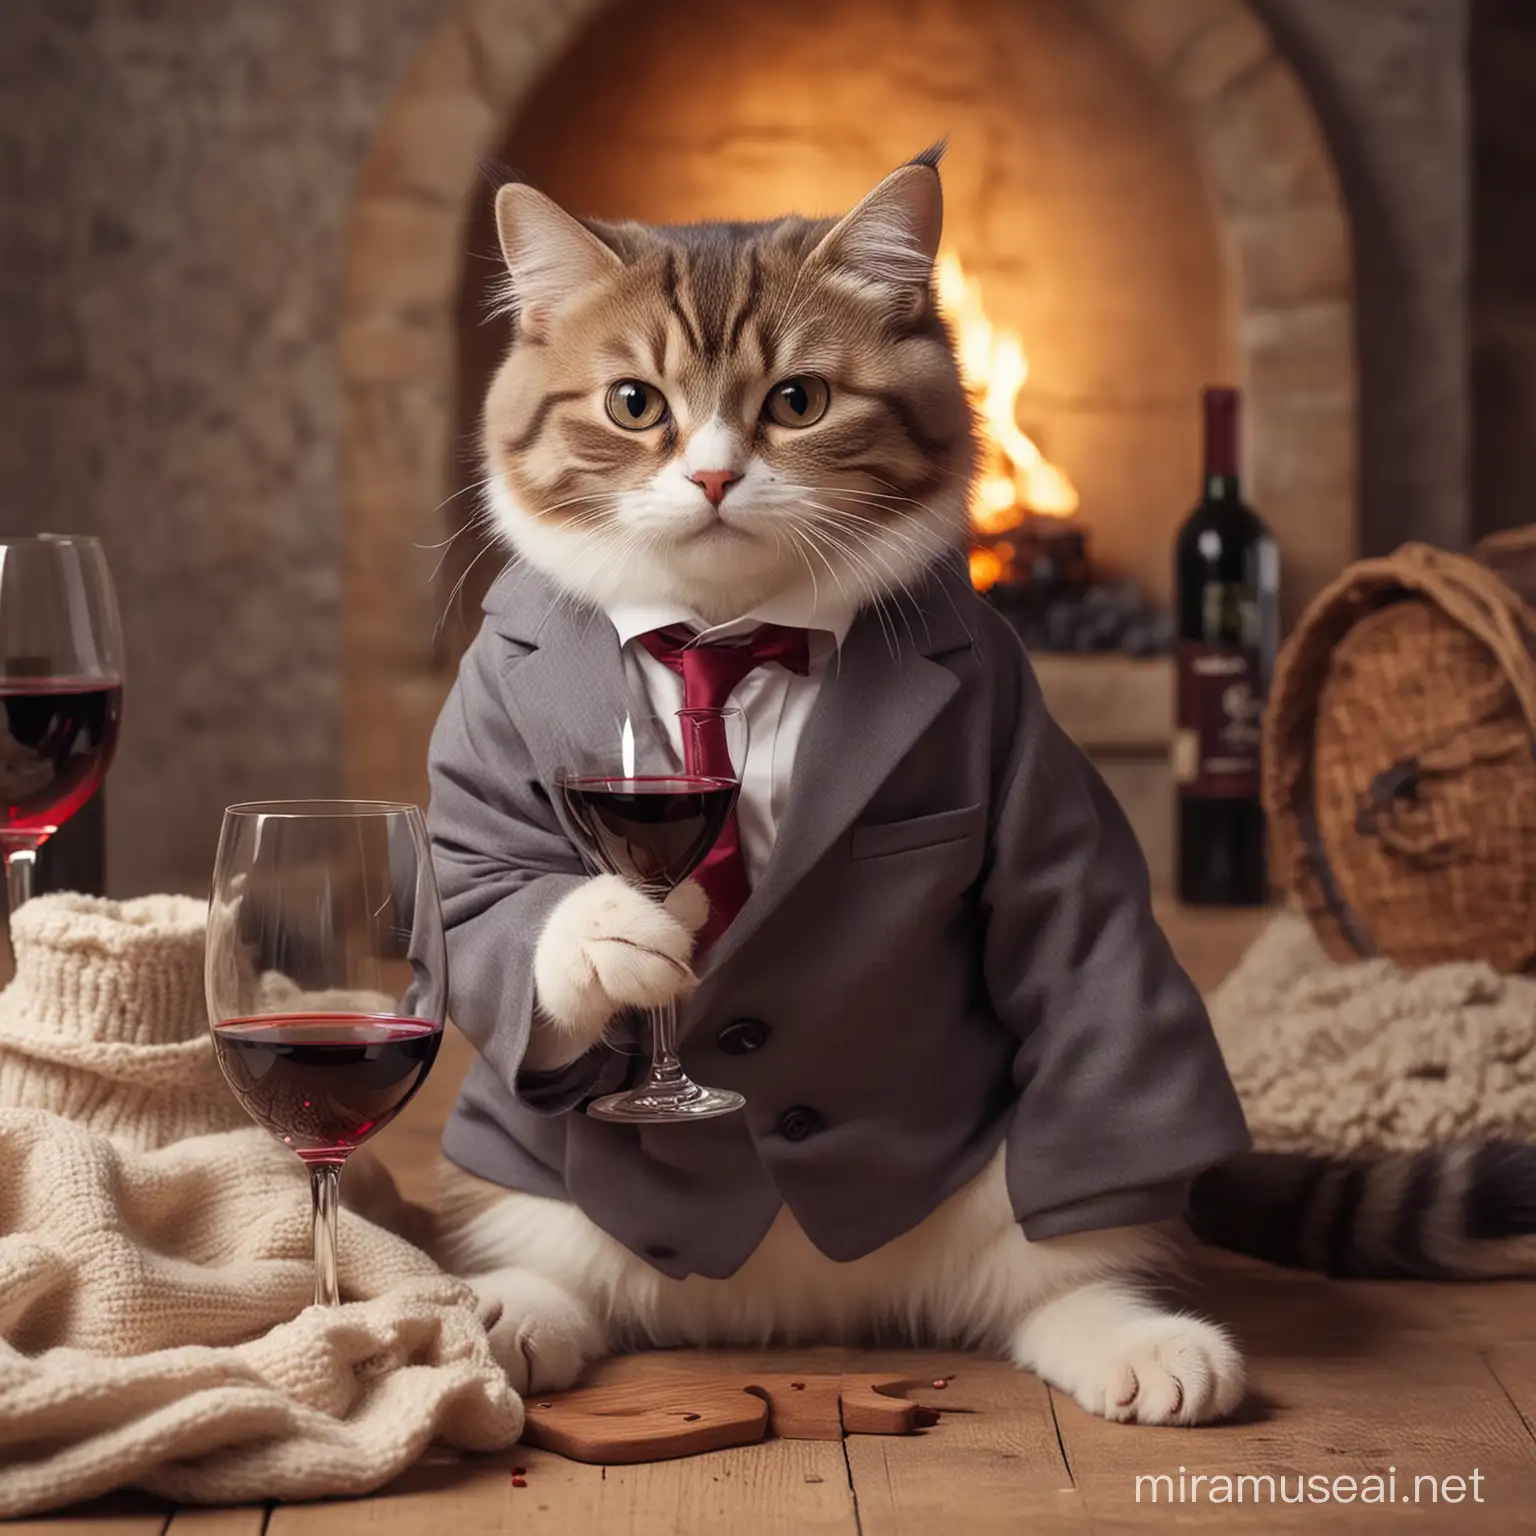 cute little cat in suit tasting wine in a cosy environment